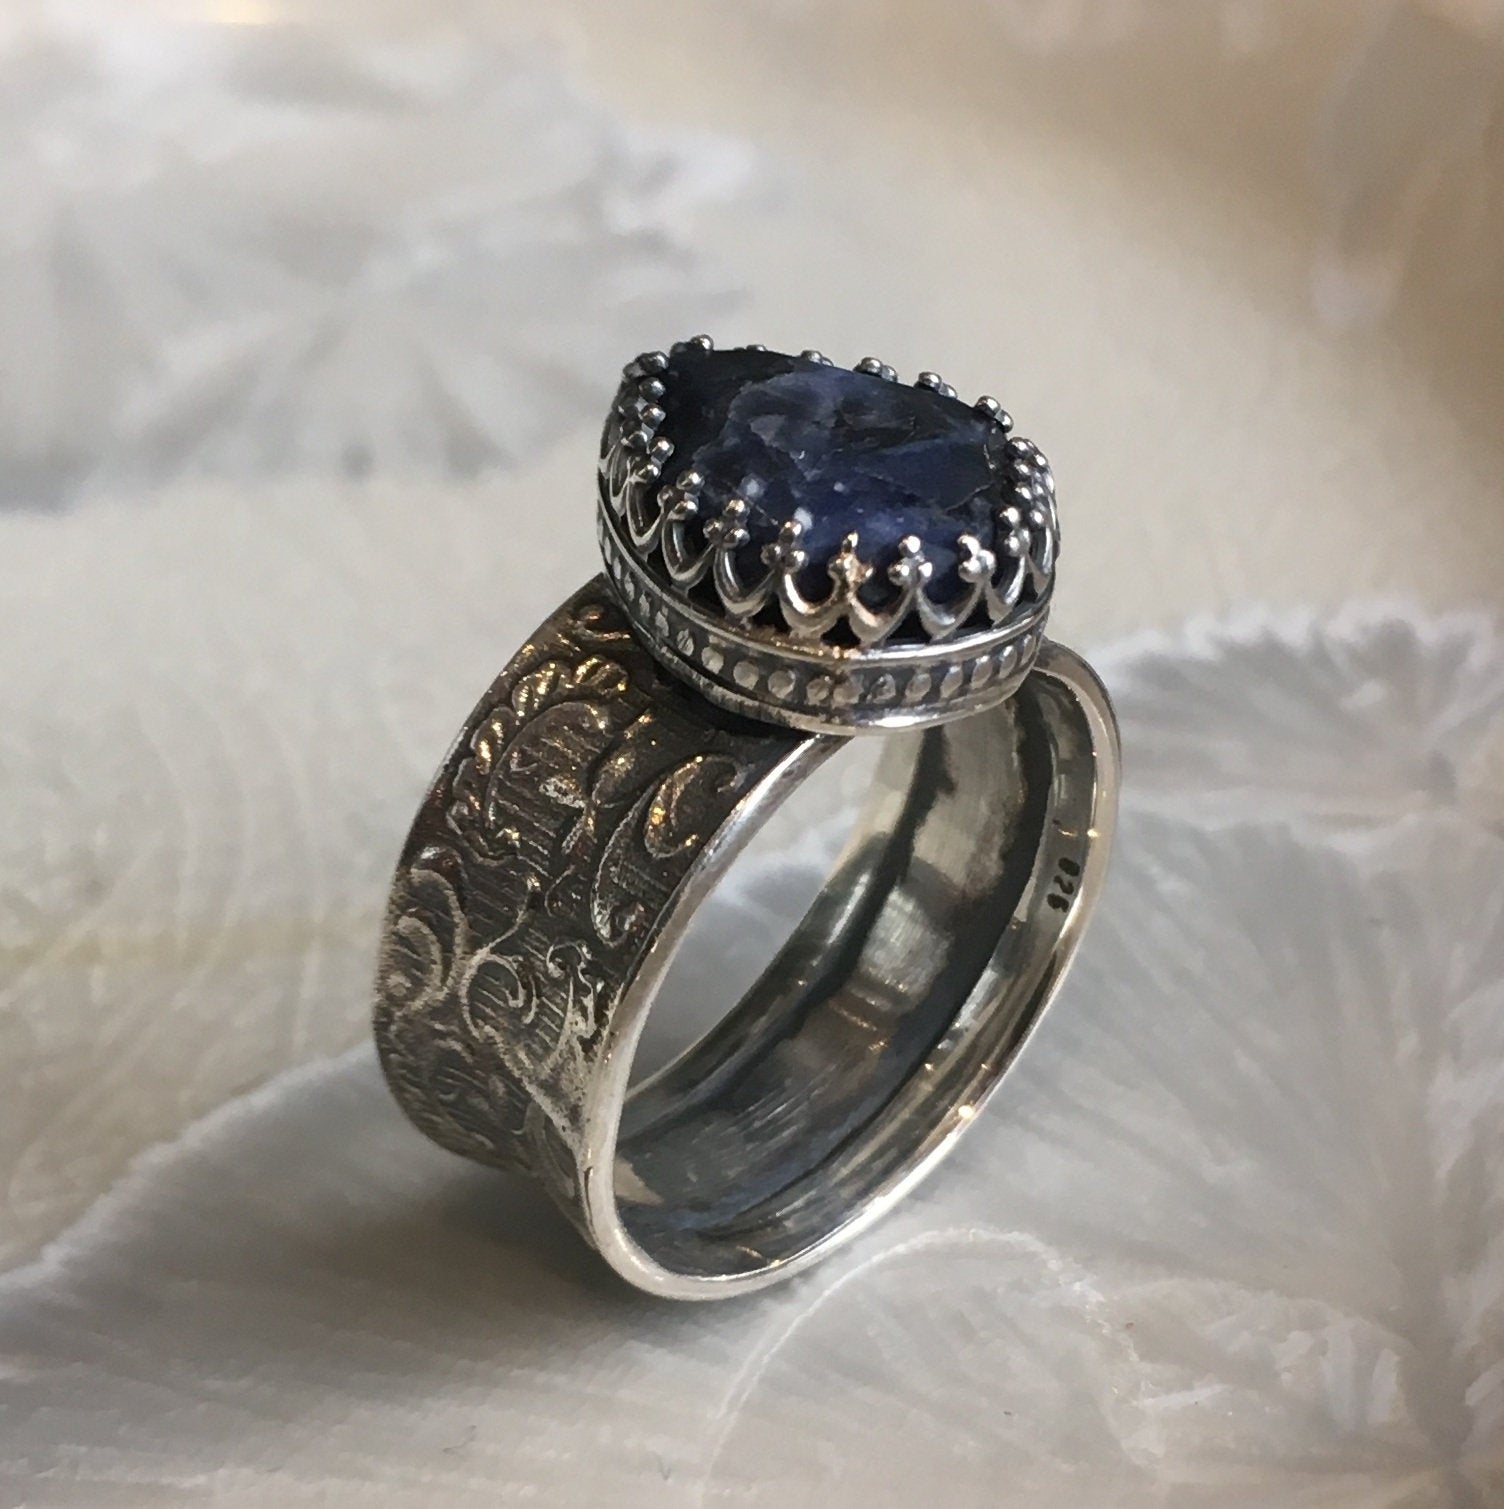 Iolite ring, filigree band, wide silver ring, blue stone ring, crown ring, statement ring, drop stone ring, everyday ring - My joy R2605